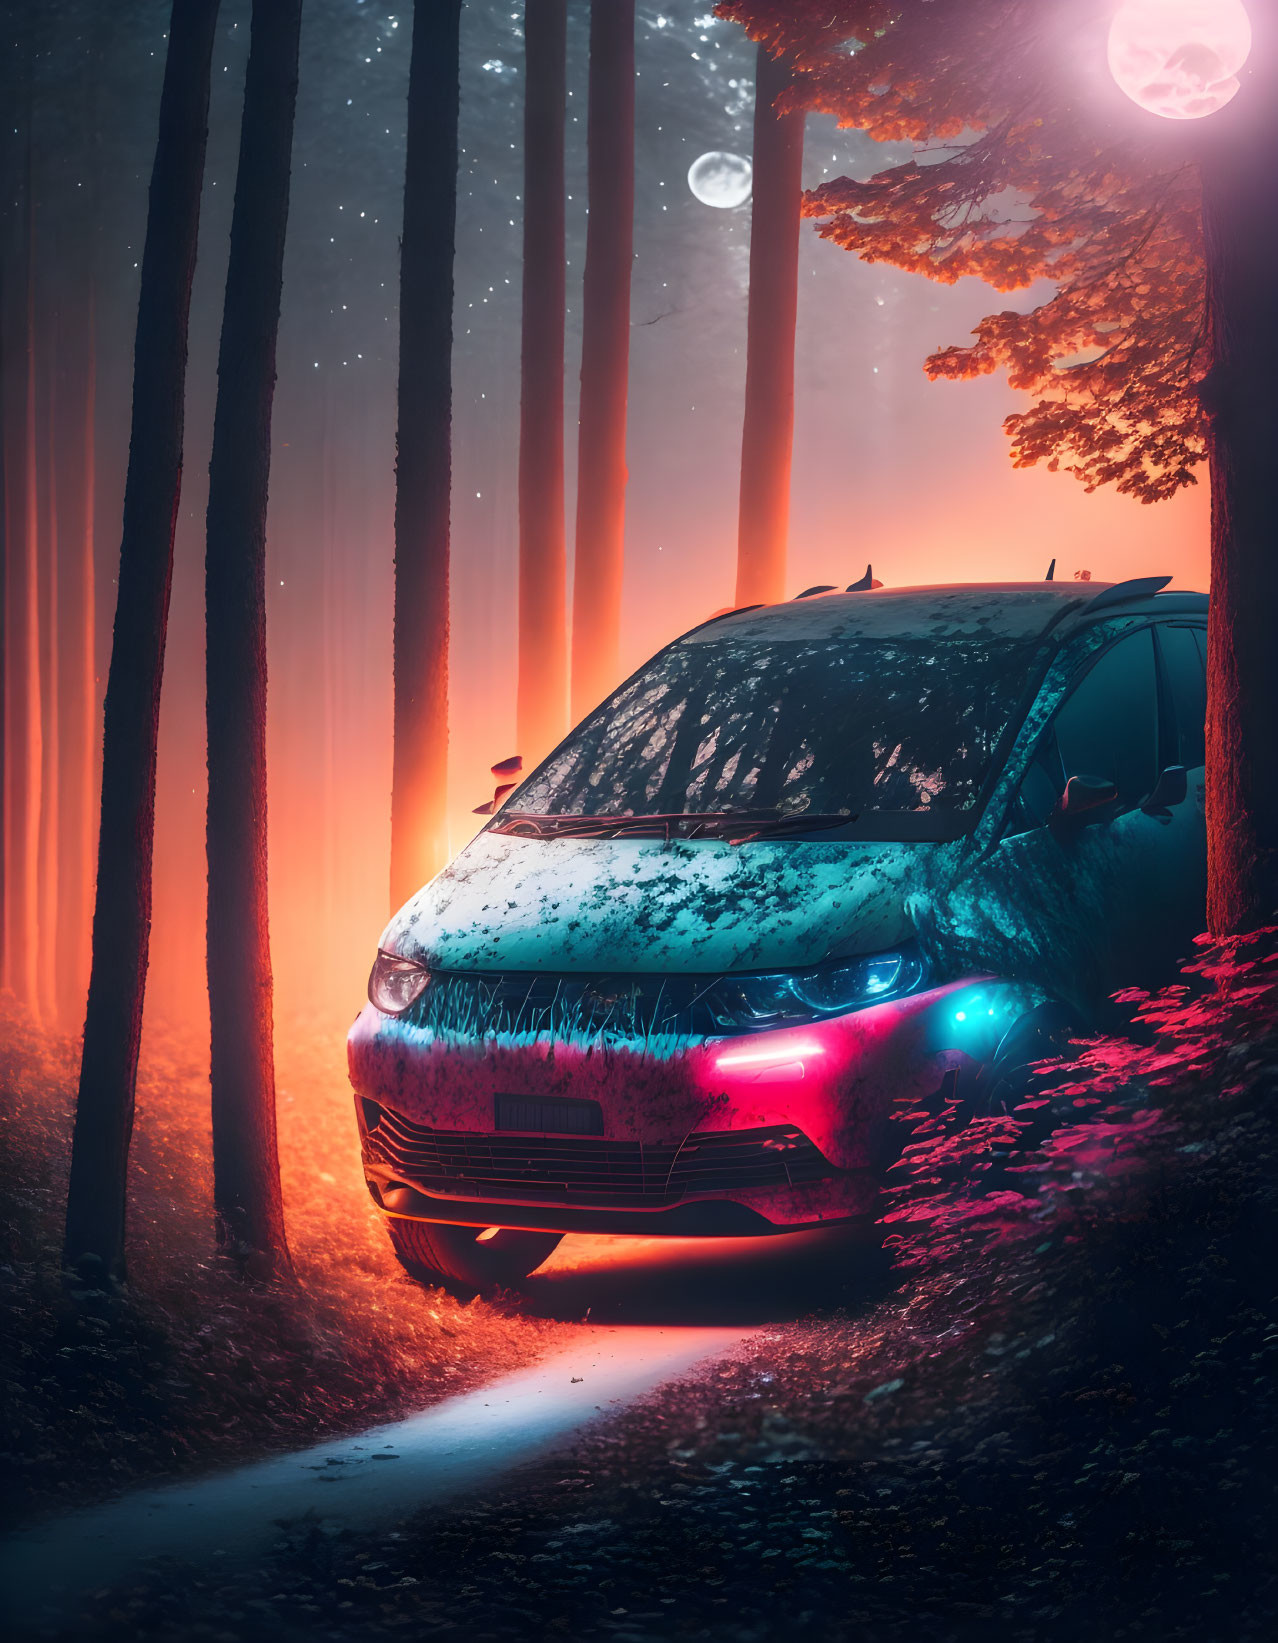 Parked car with illuminated headlights in misty forest trail at twilight